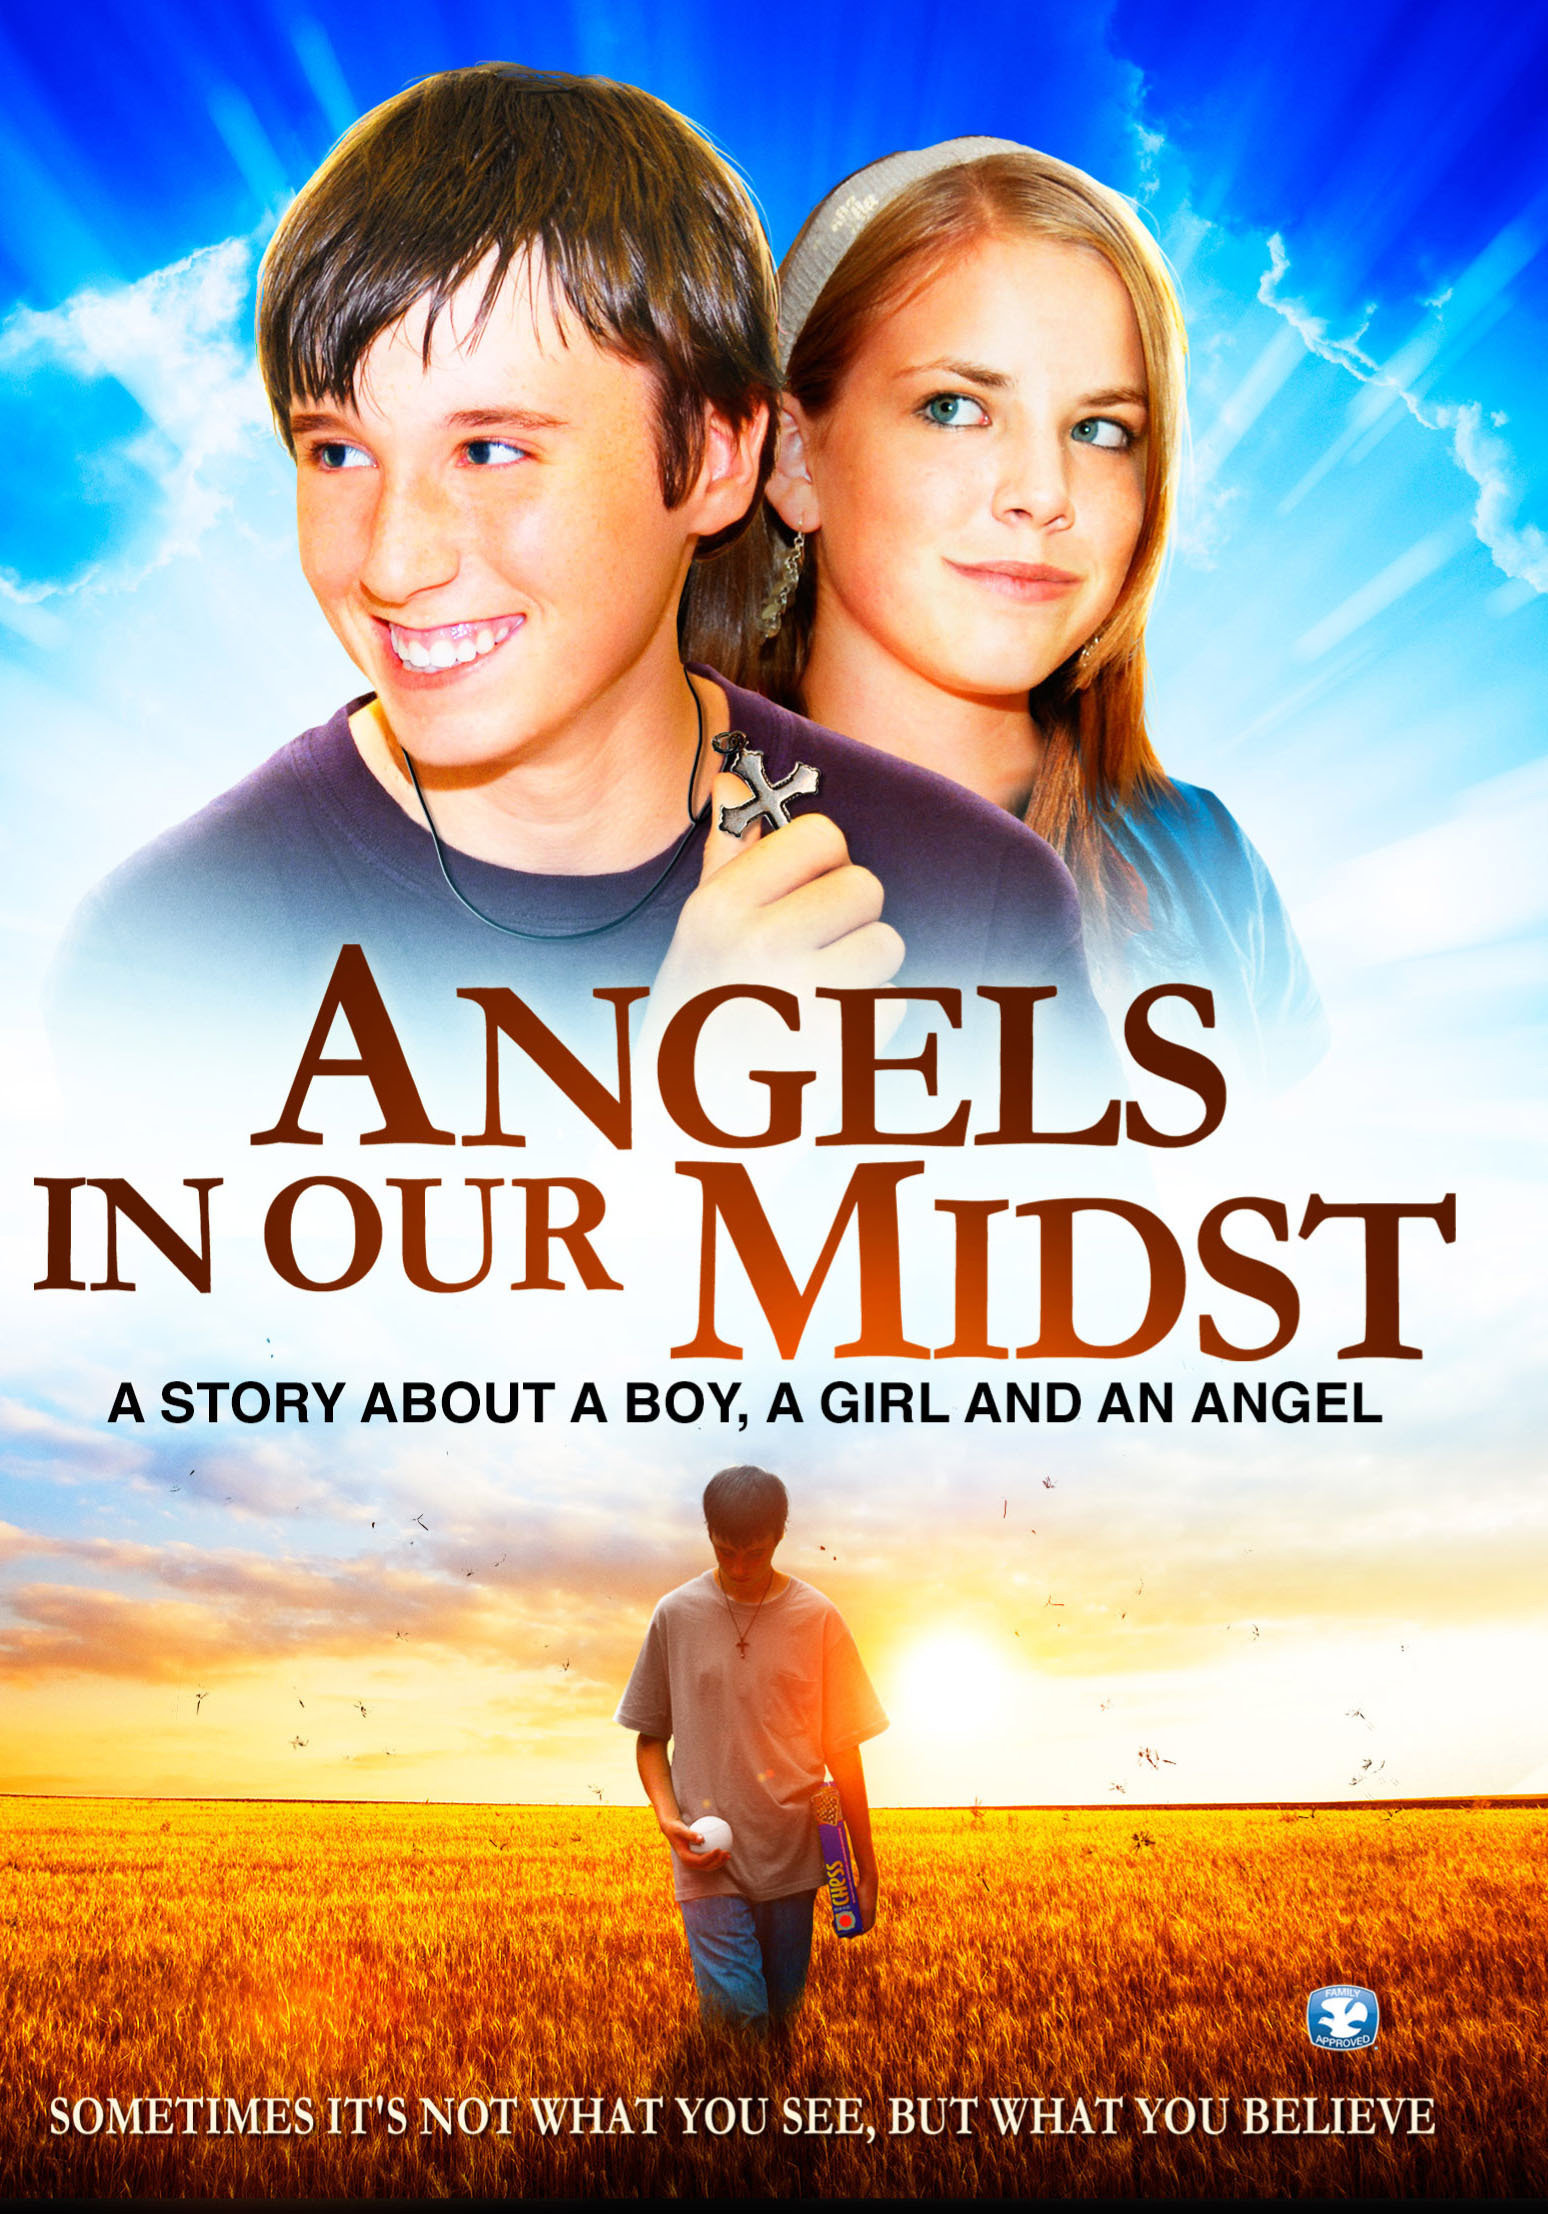 Angels in Our Midst (2007) Screenshot 1